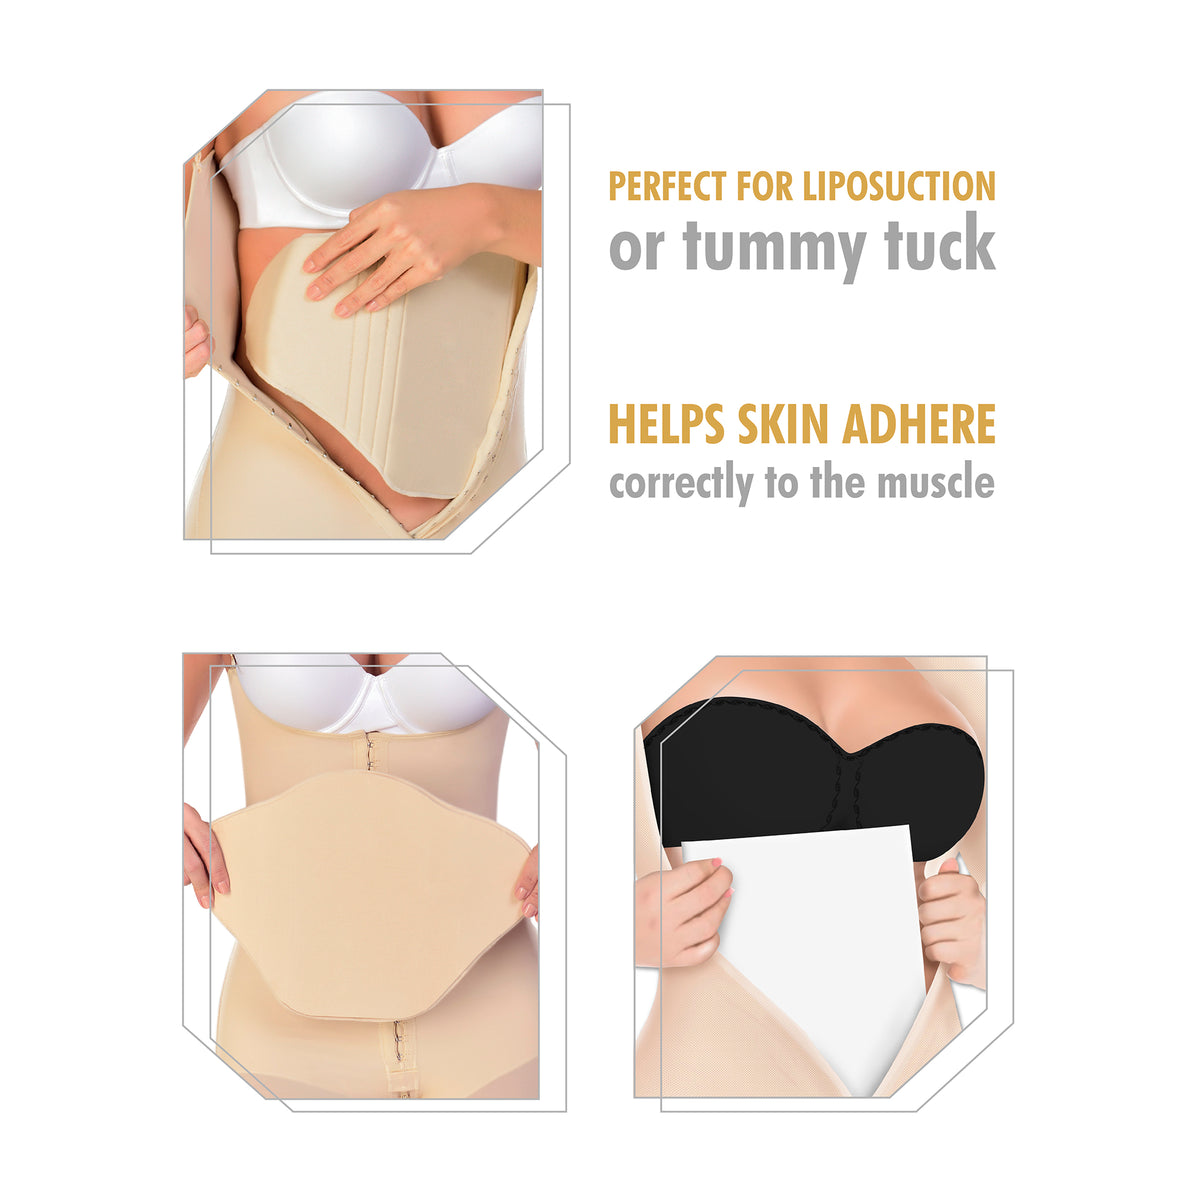 Post Op Compression Liposuction Ab Board Post Surgery Comfortable